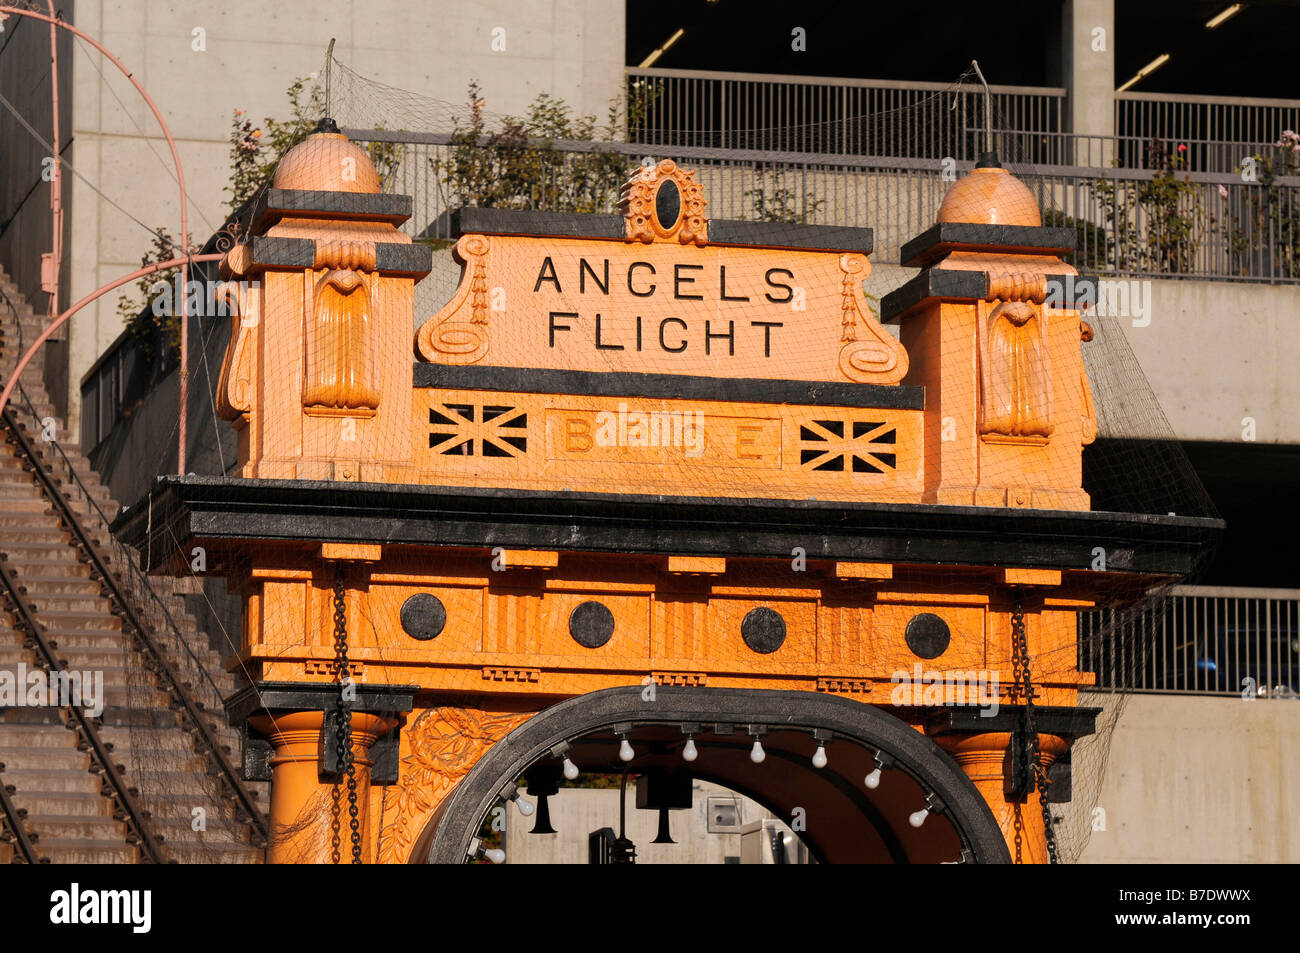 Angels flight railway station Los Angeles California Banque D'Images